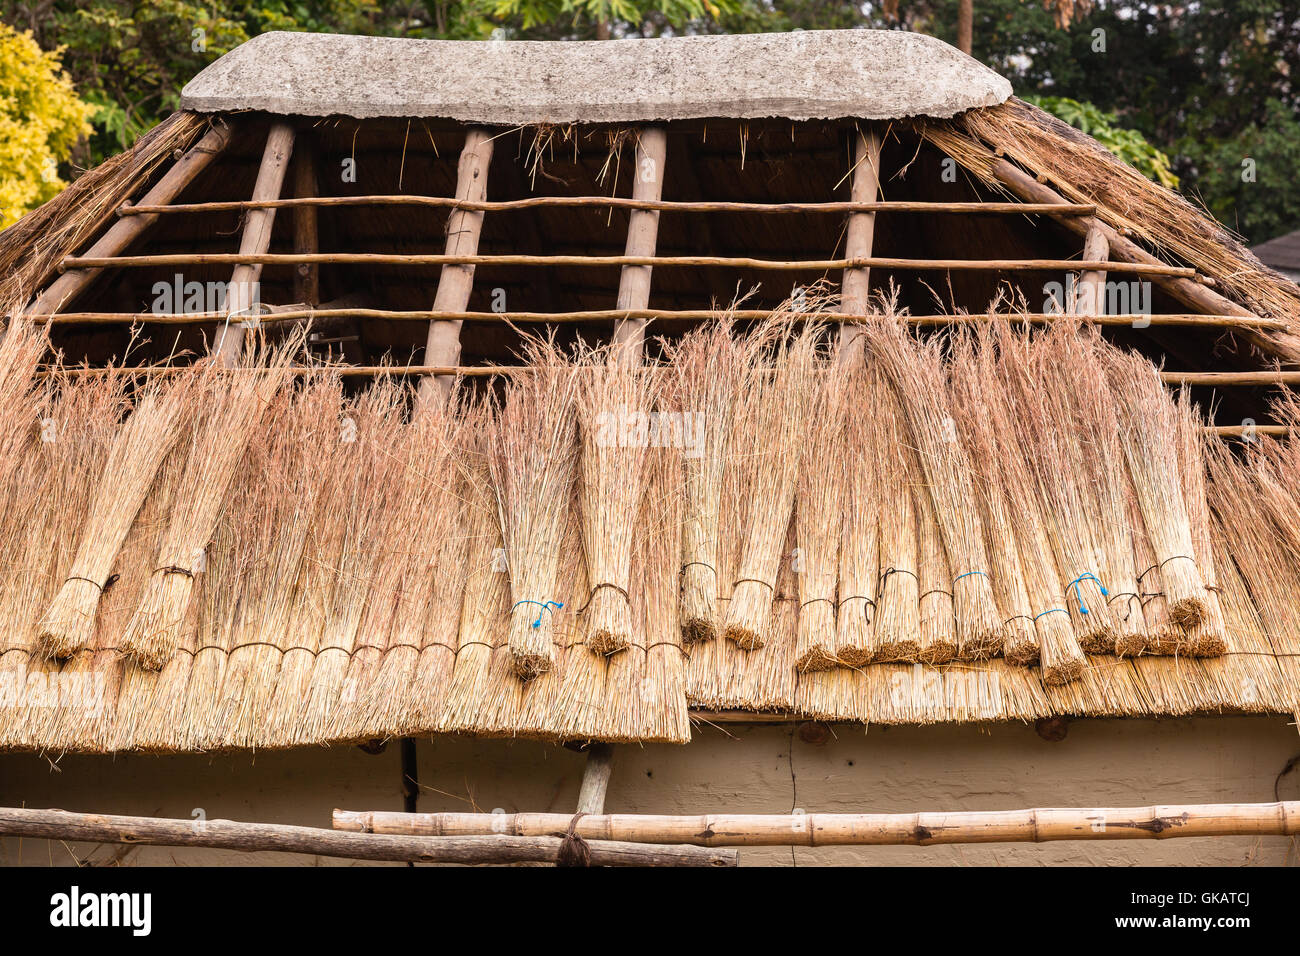 Roof grass thatching construction on wood pole cabin structure. Stock Photo